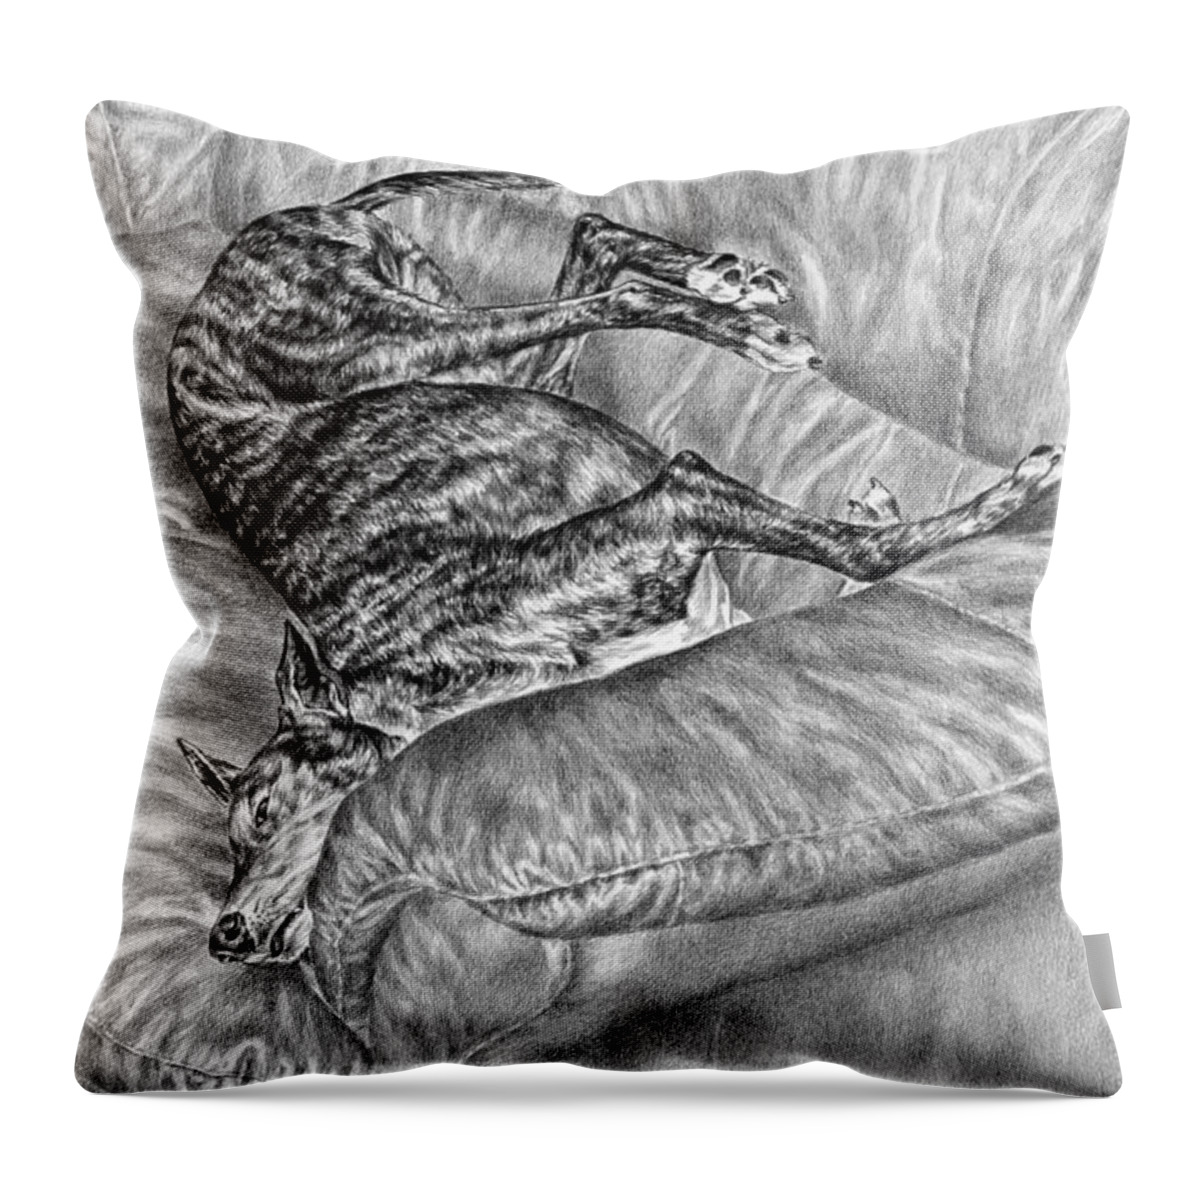 Greyhound Throw Pillow featuring the drawing Wake Me for Dinner - Greyhound Dog Art Print by Kelli Swan